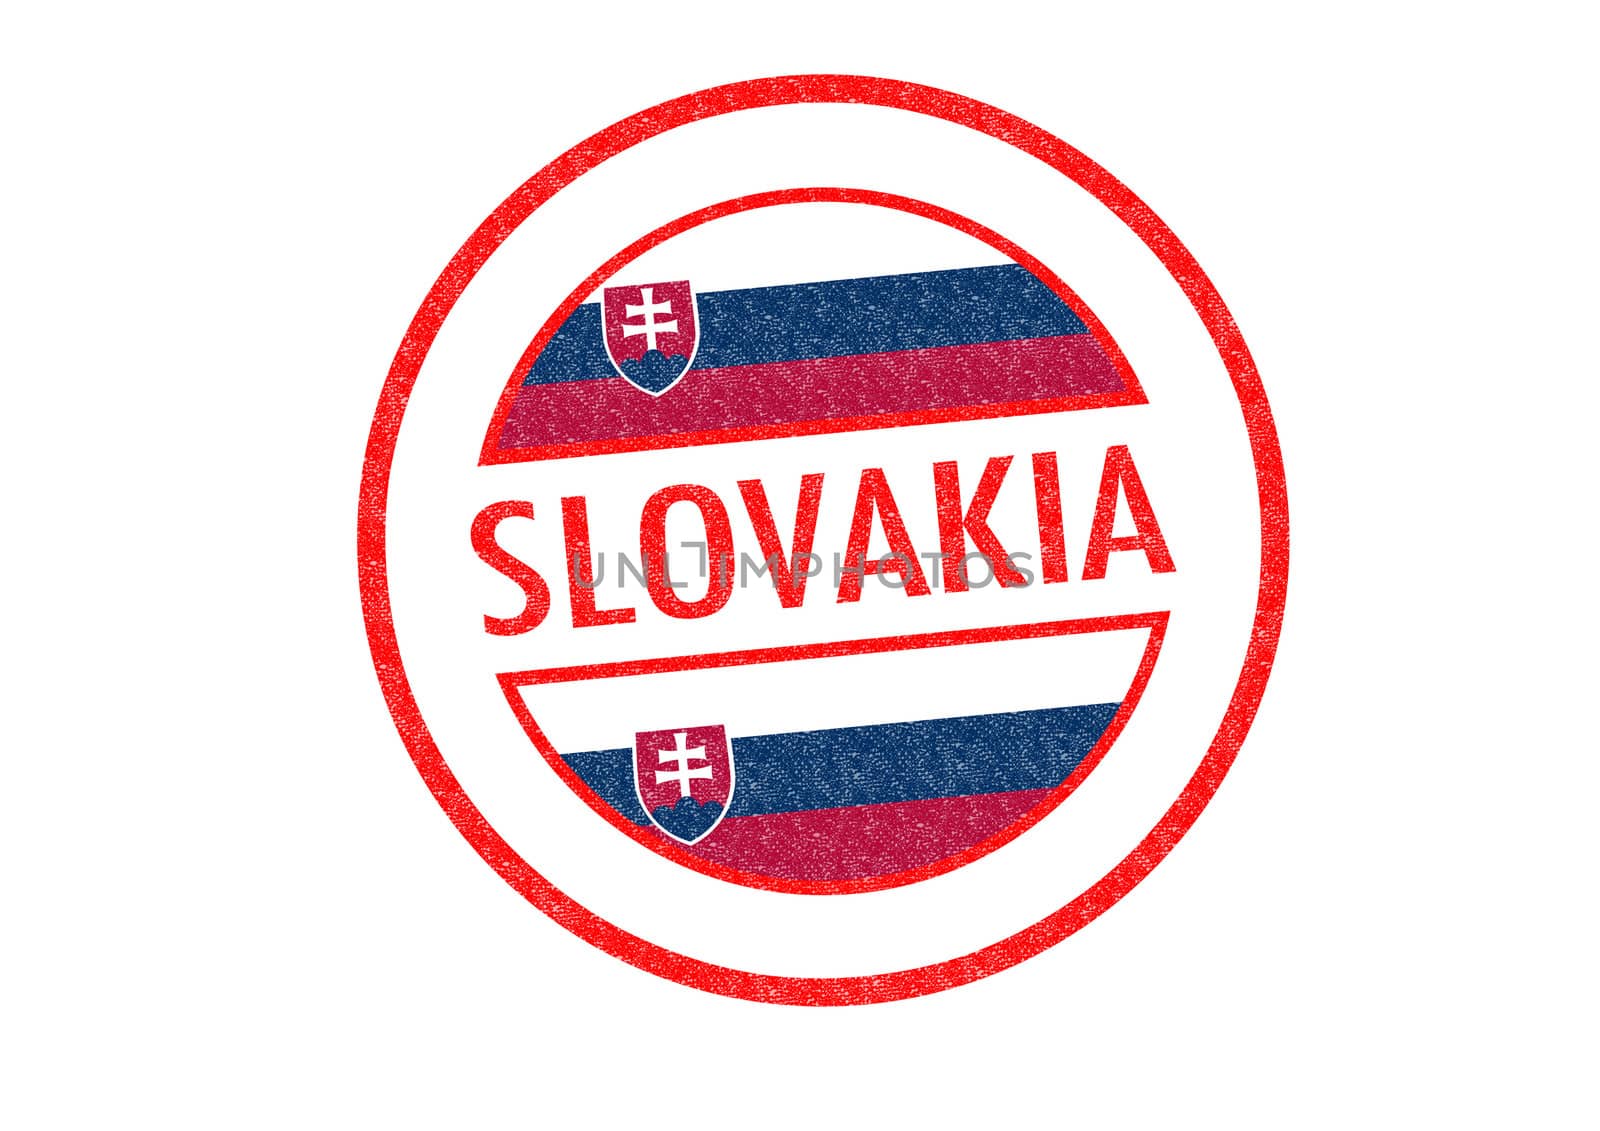 Passport-style SLOVAKIA rubber stamp over a white background.